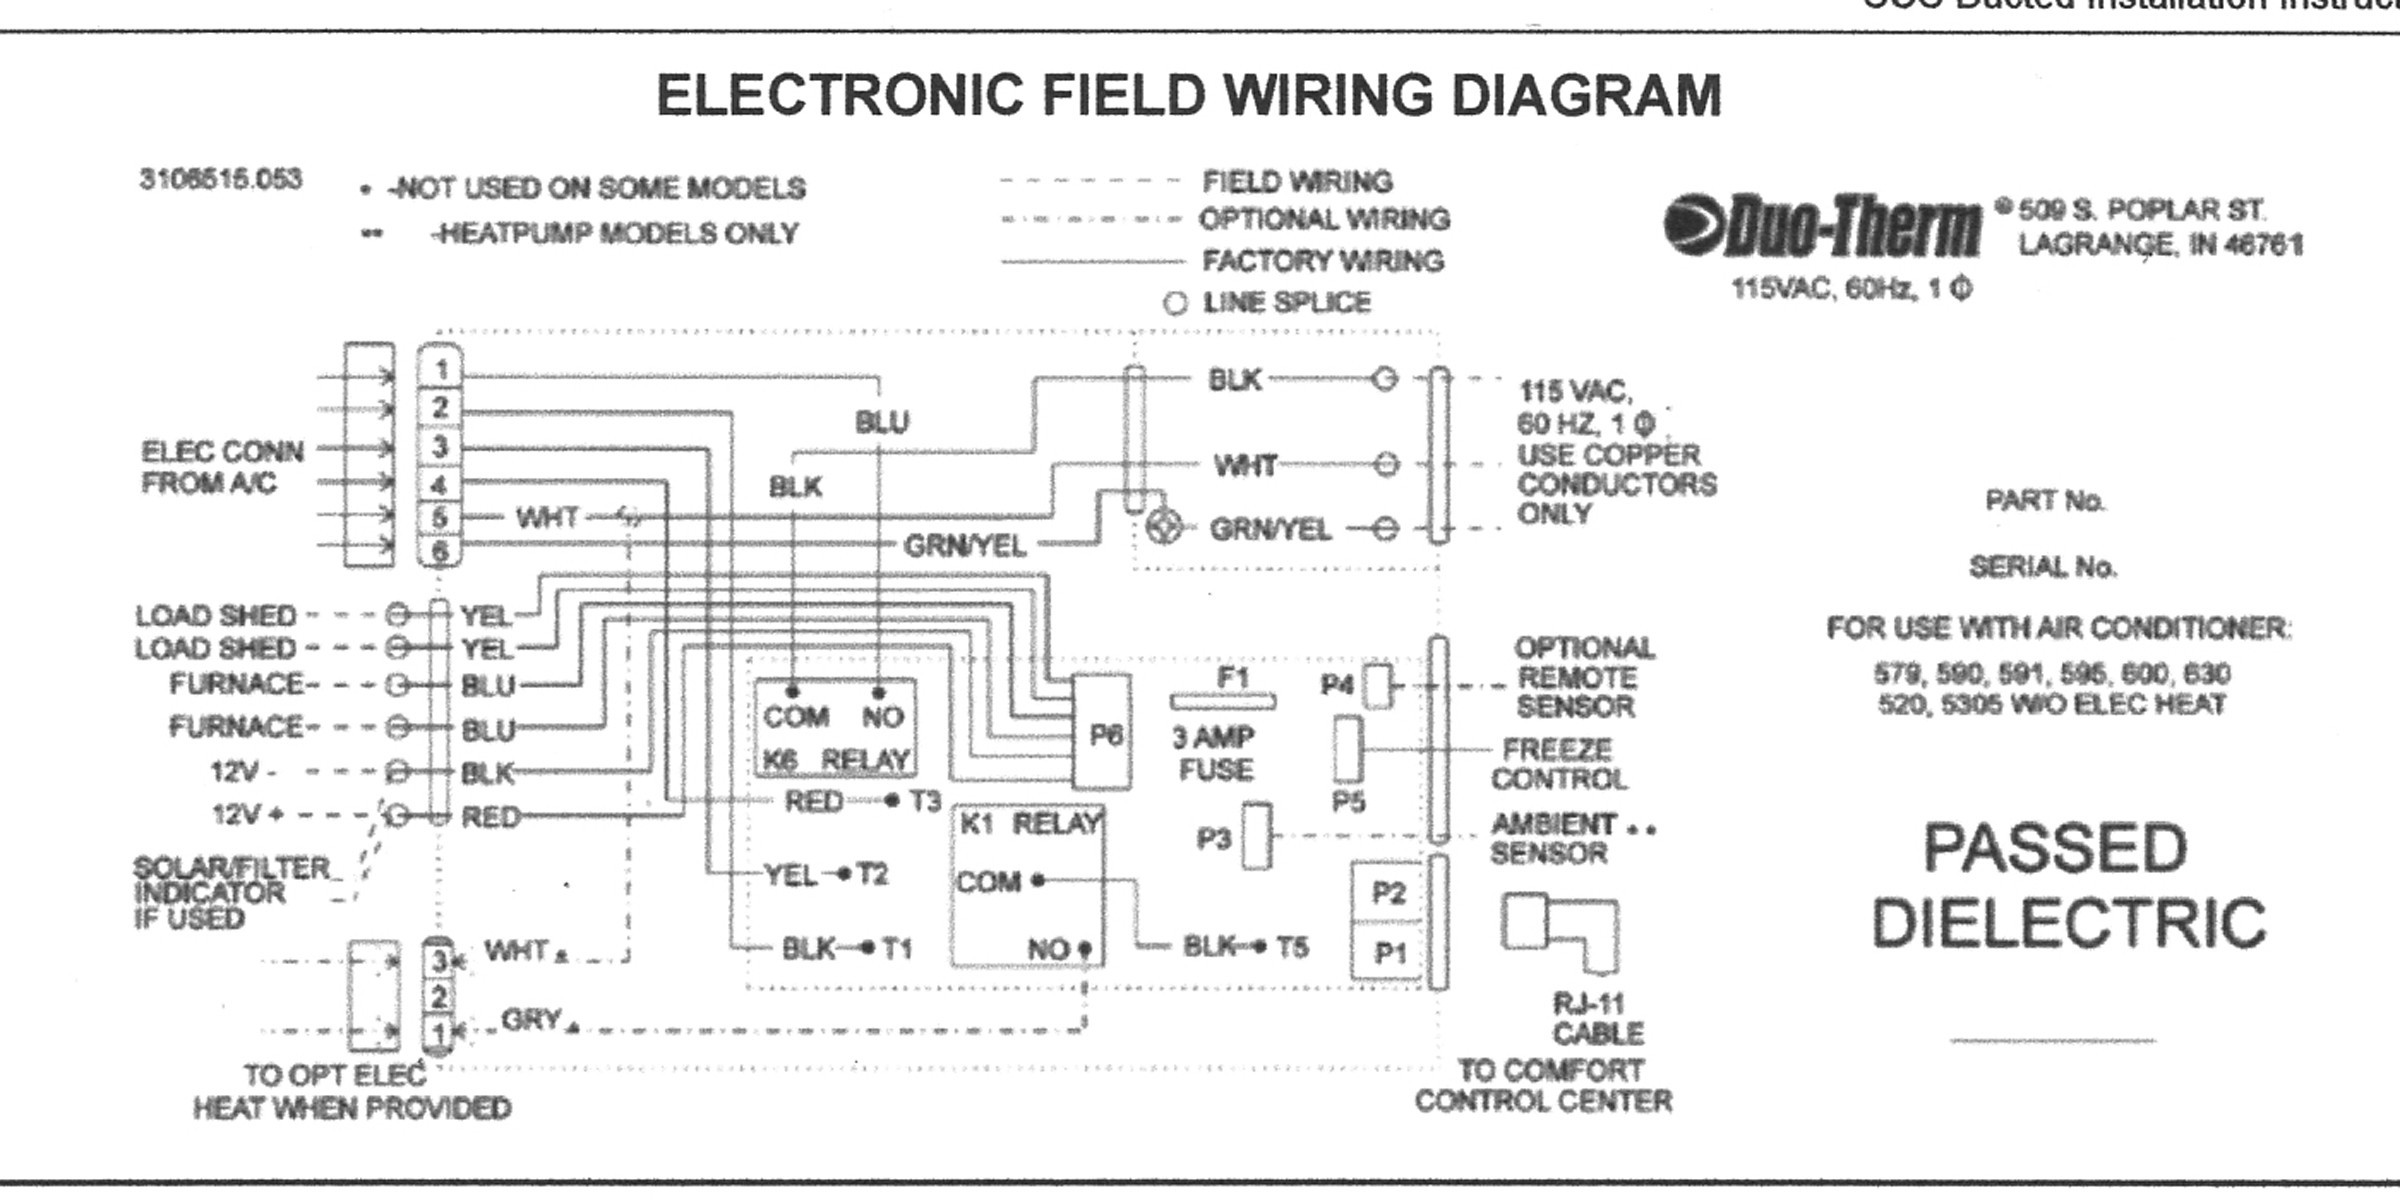 Wiring A Ac thermostat Diagram New Duo therm thermostat Wiring Diagram and Suburban Rv Furnace Wiring